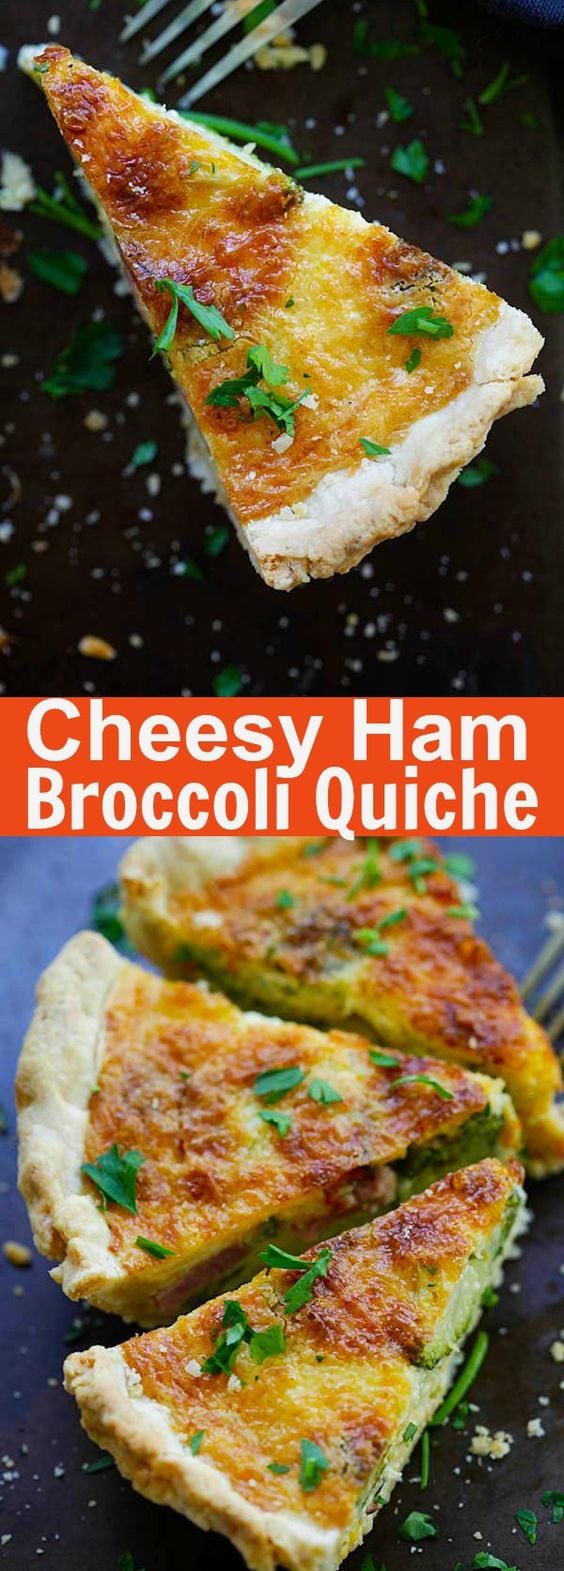 Cheesy Ham and Broccoli Quiche – the BEST homemade quiche you’ll ever made, with cheesy egg custard loaded with ham and broccoli. So good | rasamalaysia.com